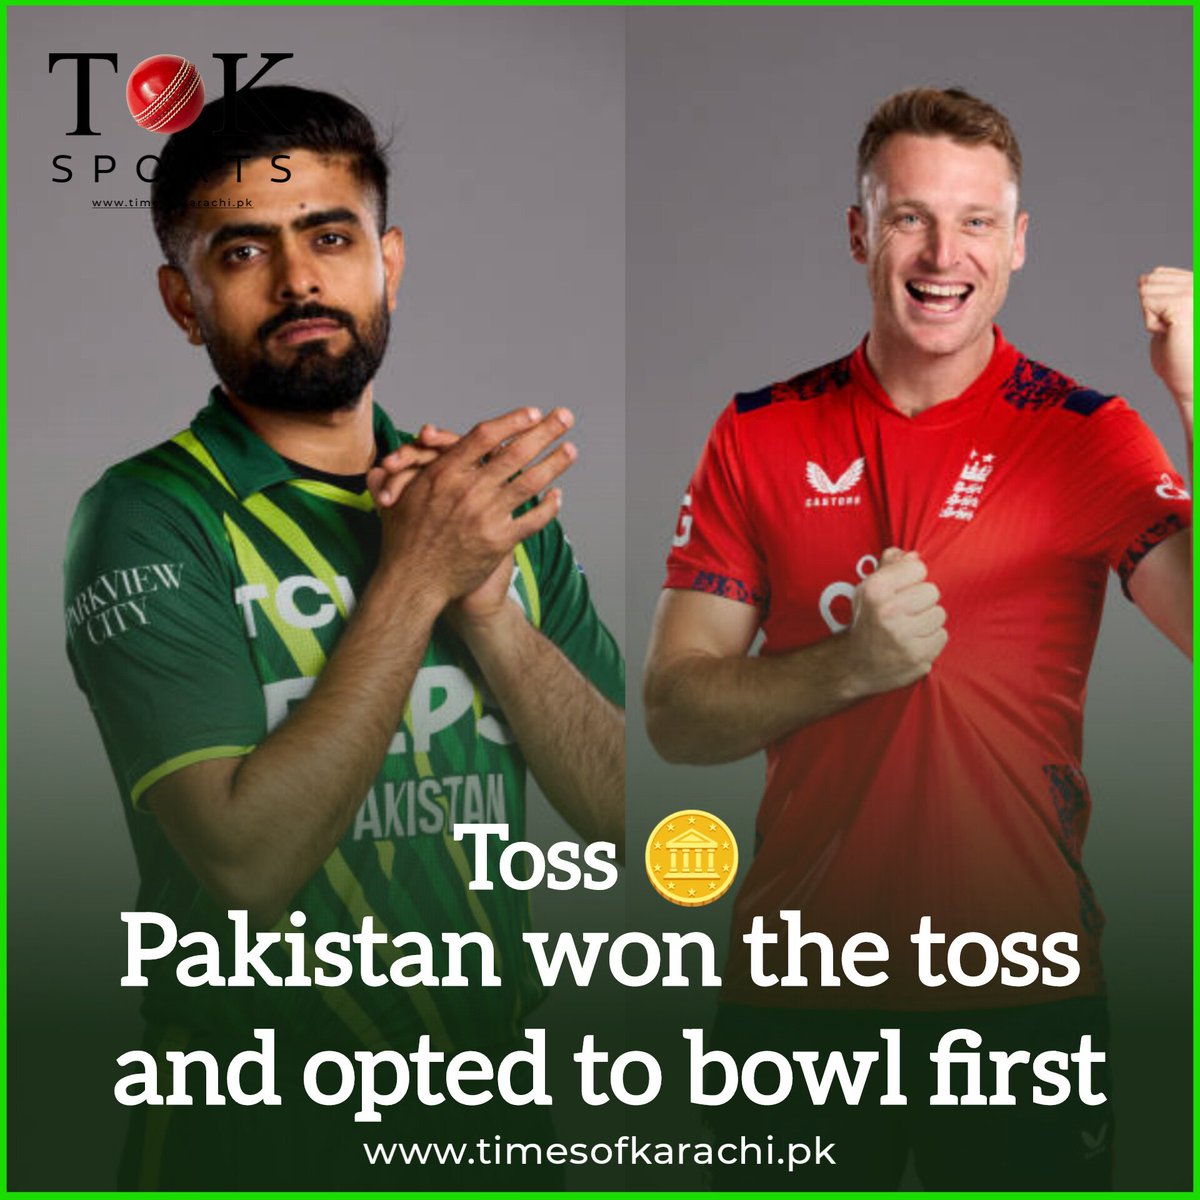 Toss 🪙 : Pakistan 🇵🇰 won the toss and decided to bowl first. For Pakistan, Haris Rauf is making his comeback, while for England, Jofra Archer is returning to the squad. #TOKSports #PAKvENG